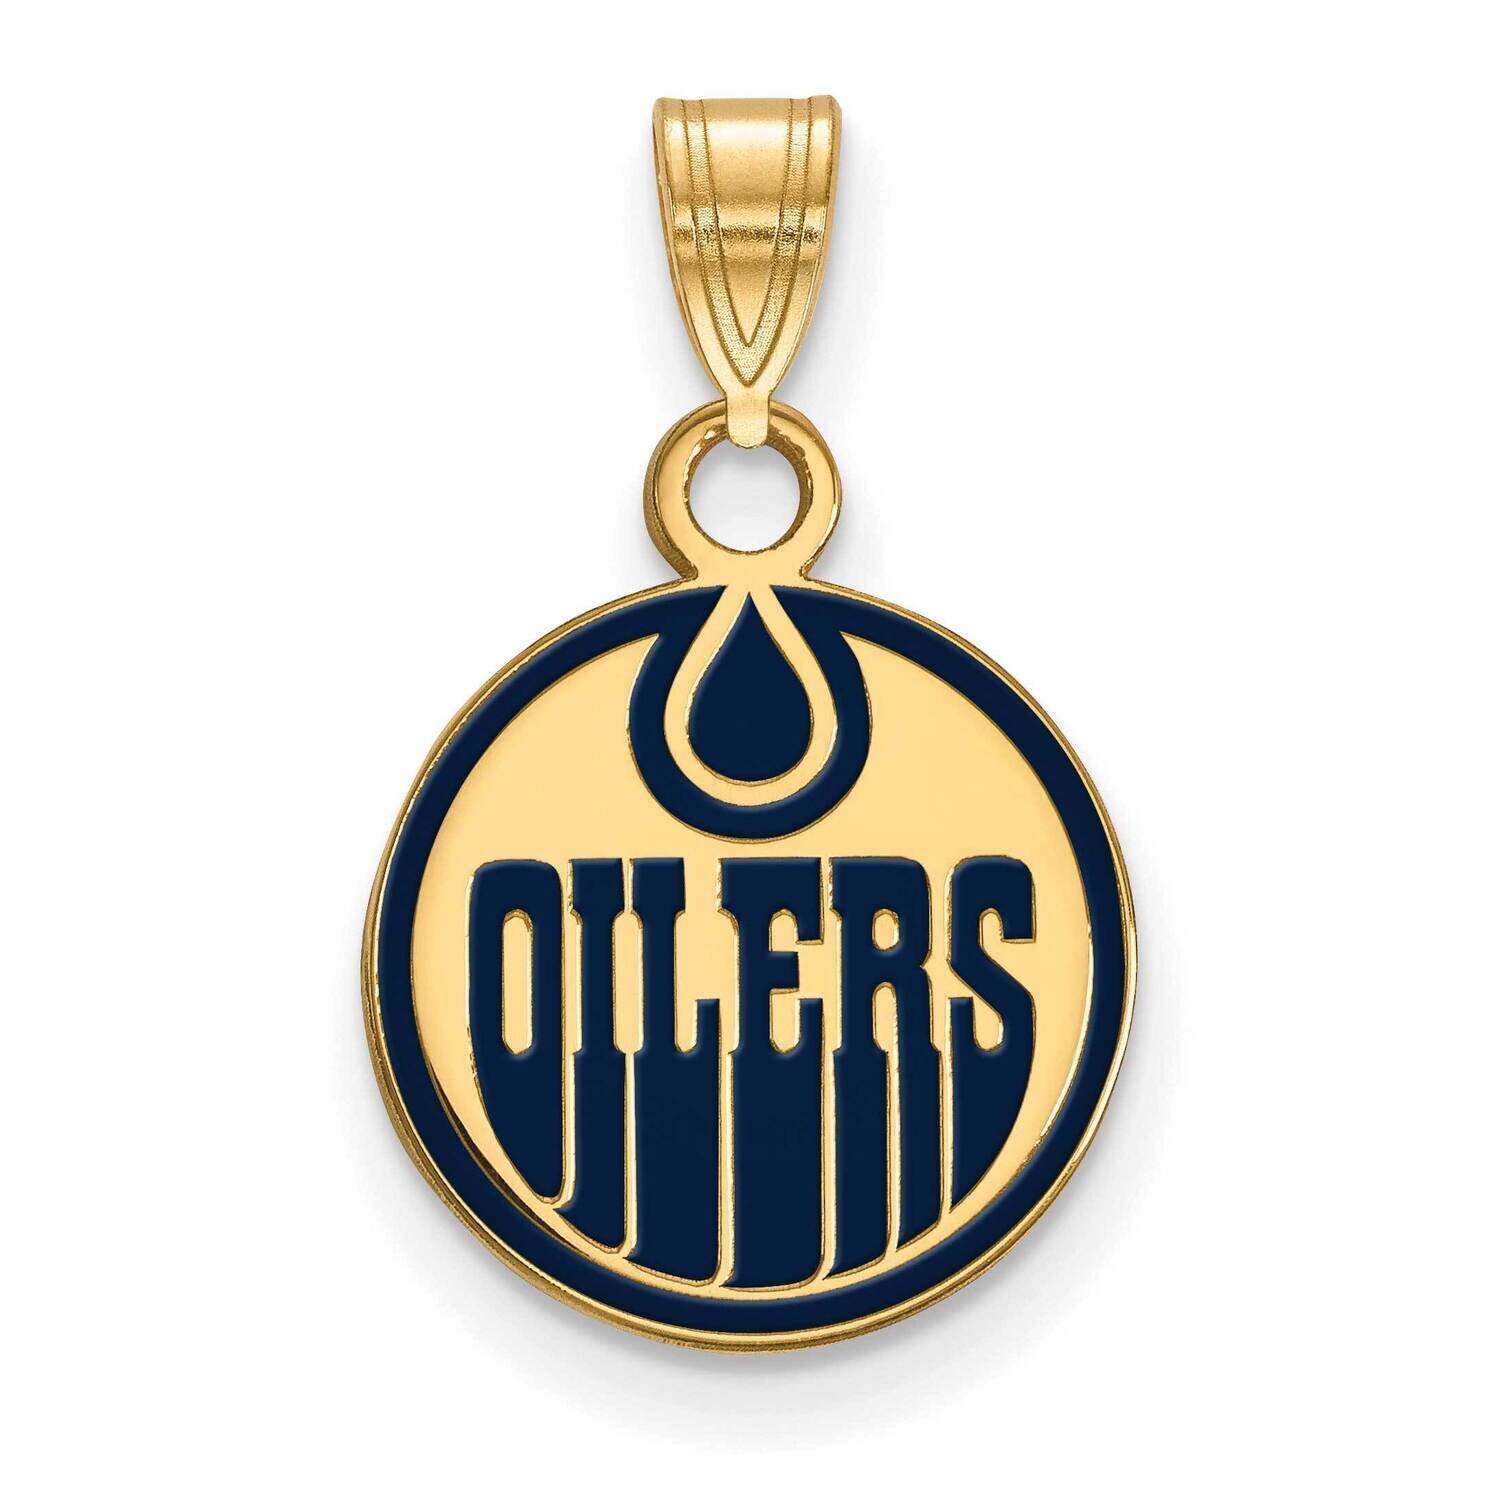 Edmonton Oilers Small Enamel Pendant Gold-plated Sterling Silver GP021OIL